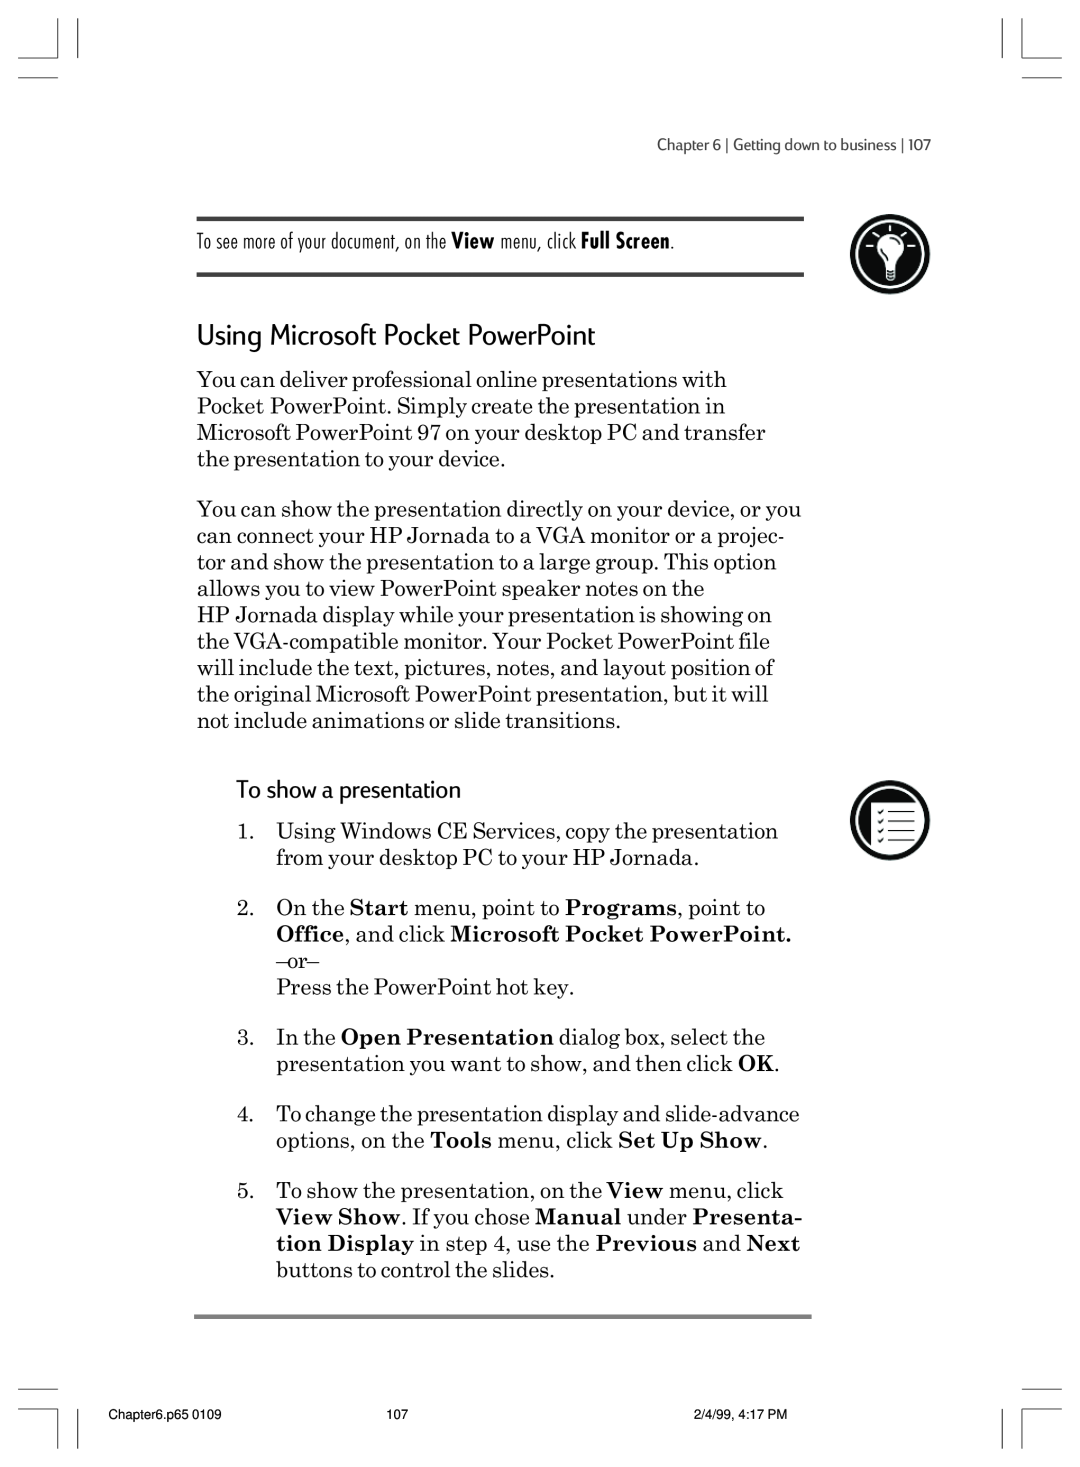 HP 820 E manual Using Microsoft Pocket PowerPoint, To show a presentation 